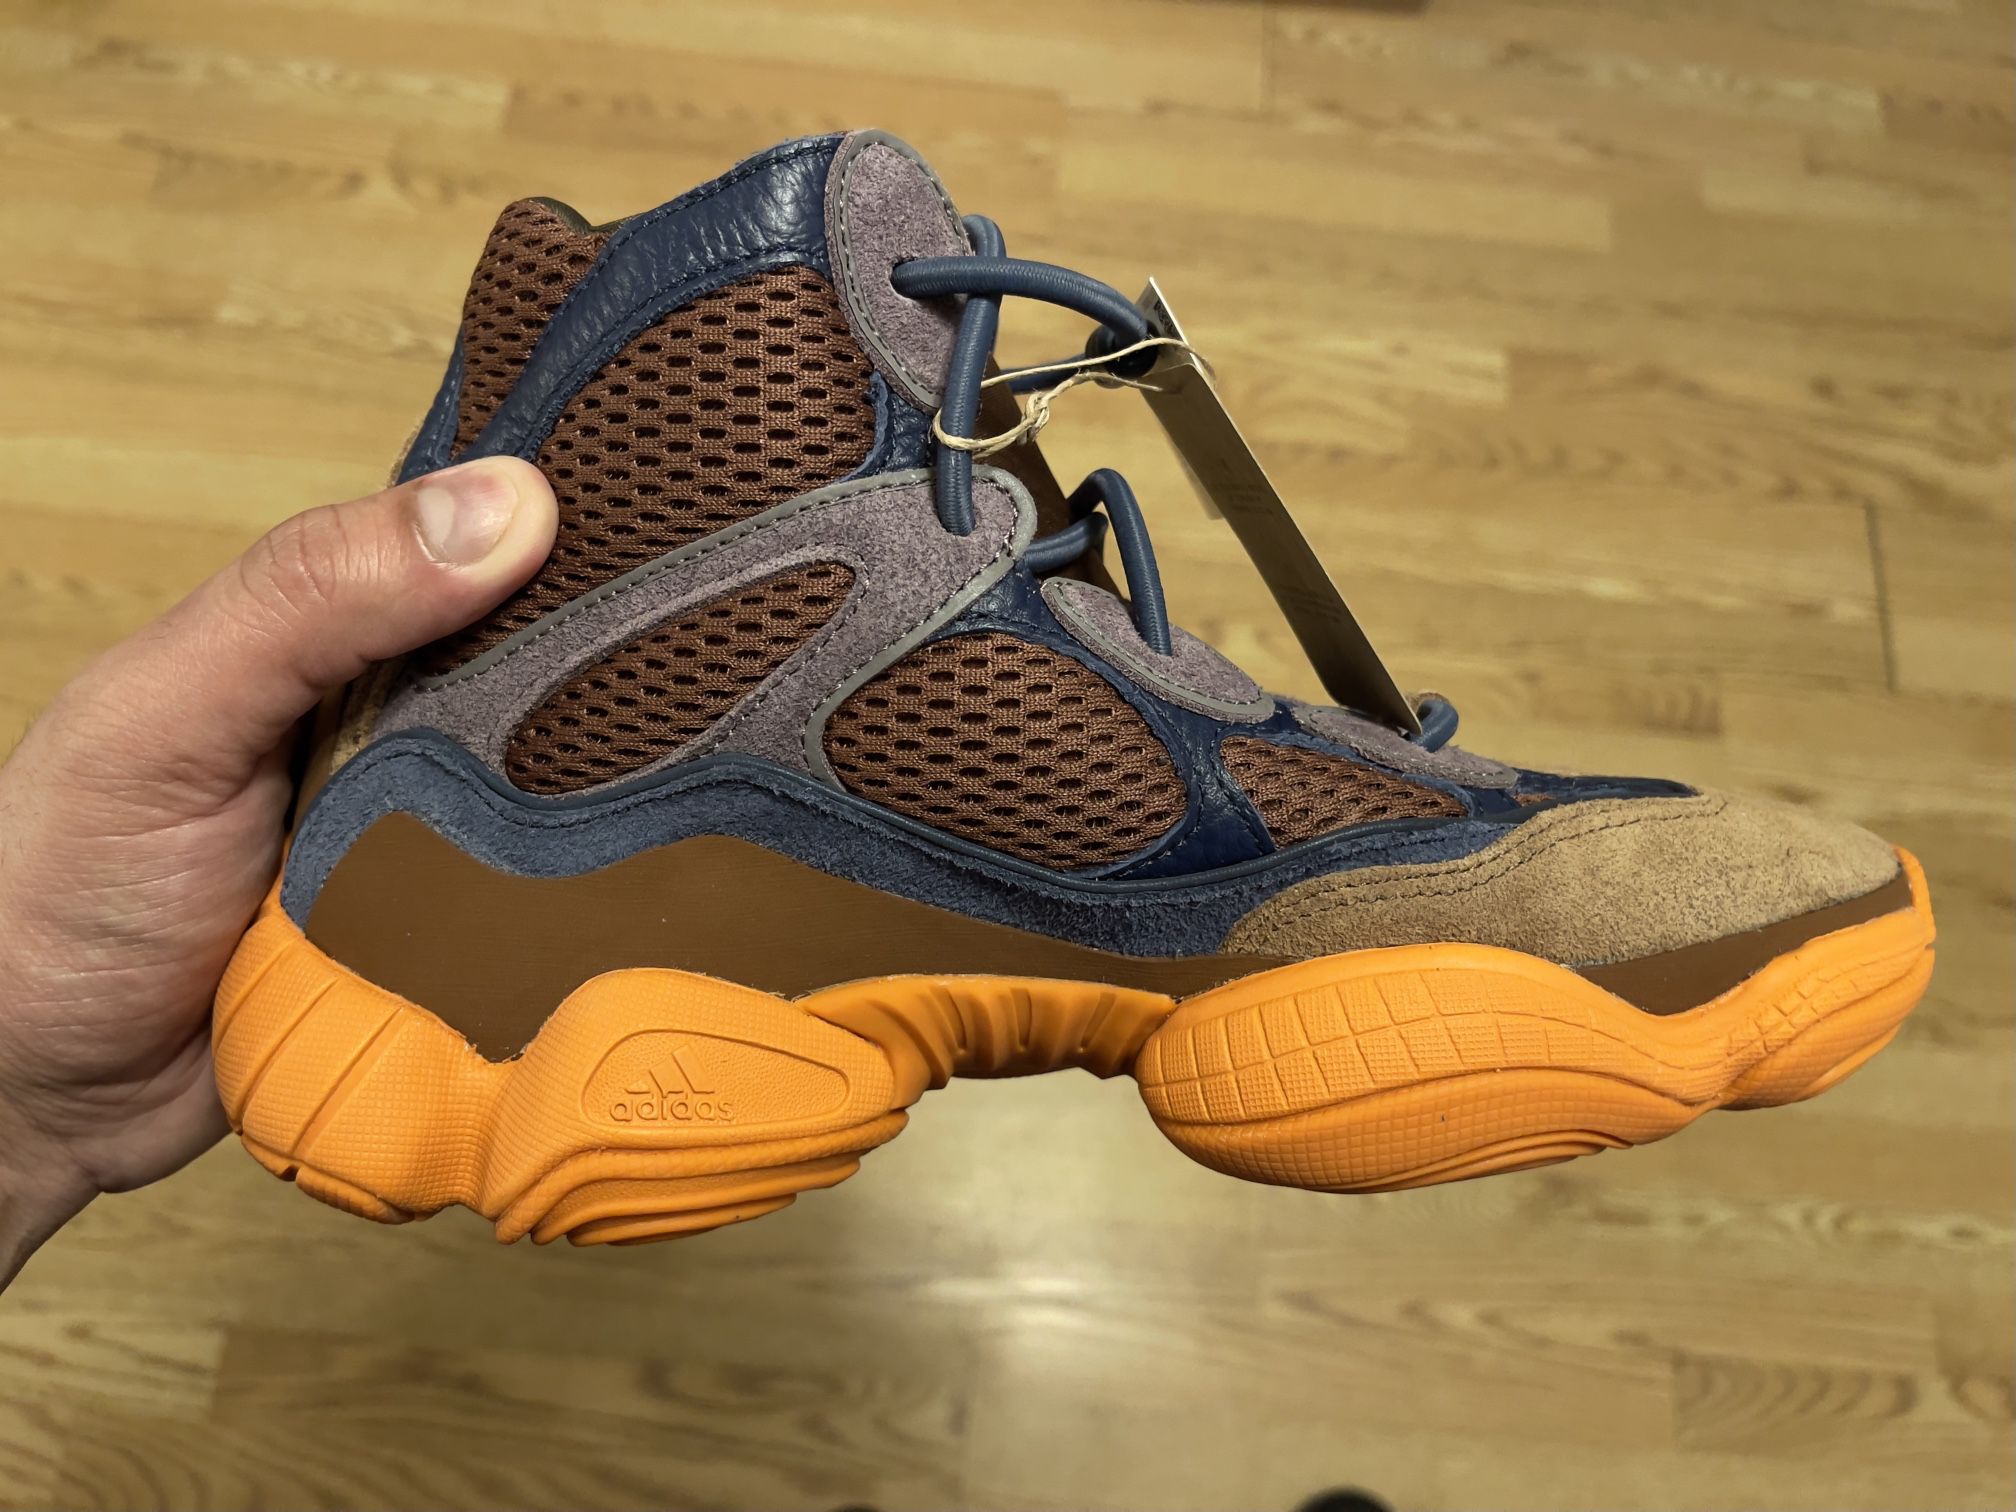 Adidas Yeezy 500 High Tactile Orange for Sale in Hicksville, NY - OfferUp